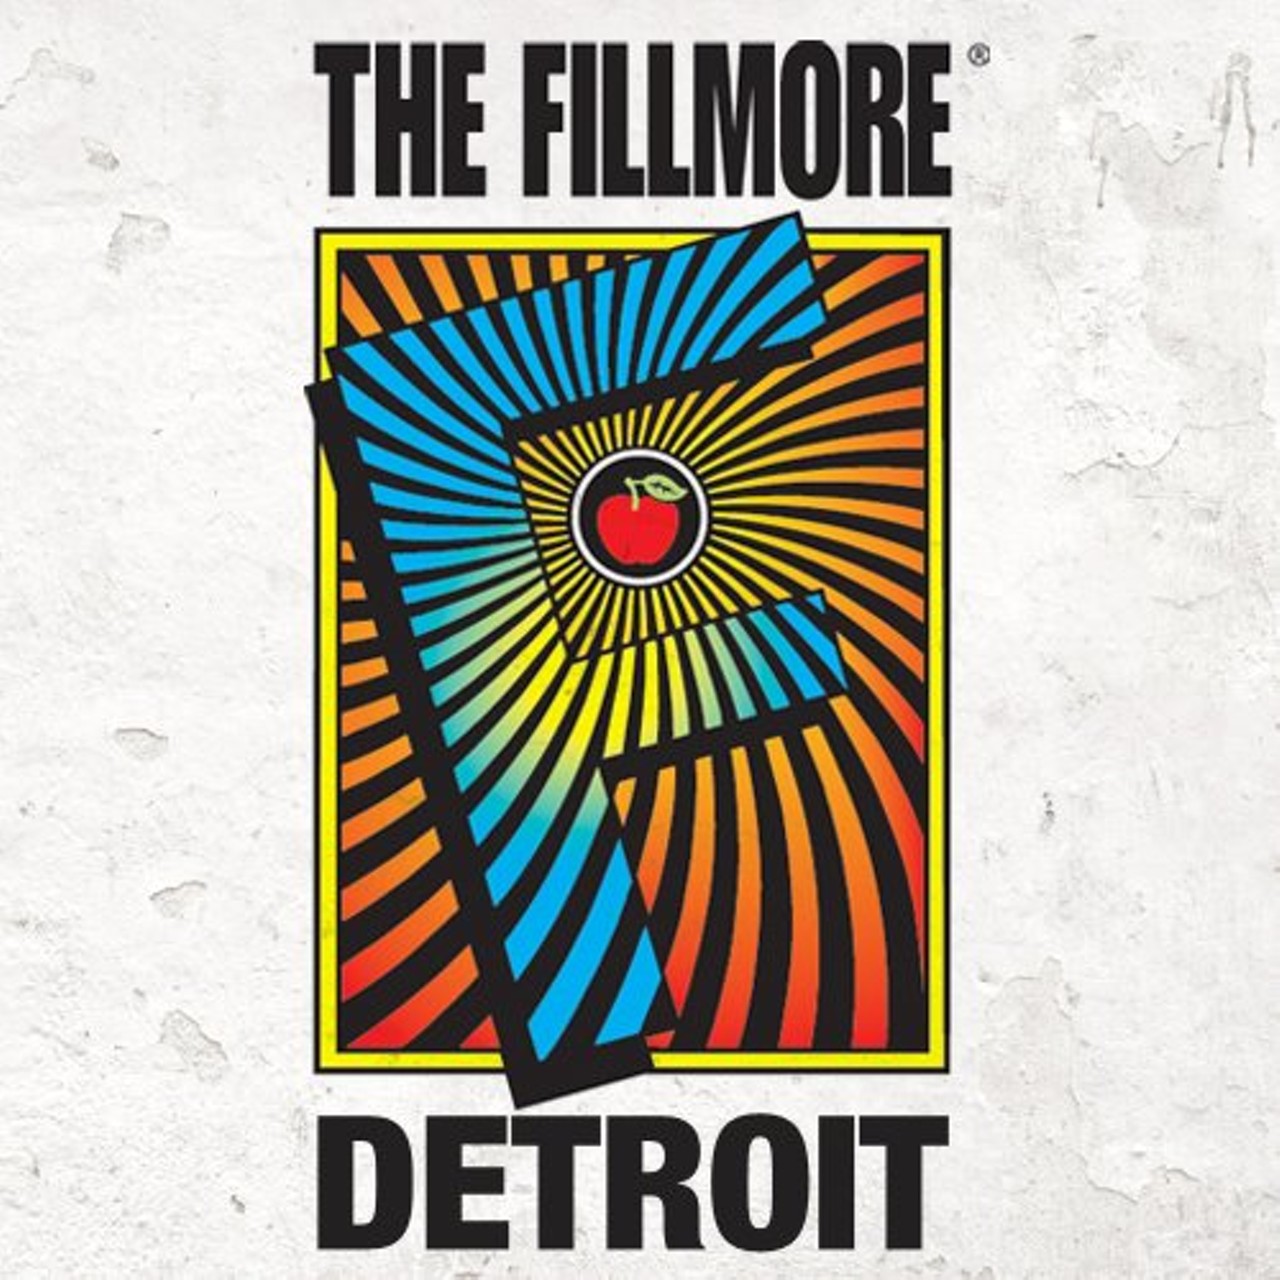 Fillmore
The Riff will broadcast live from the Fillmore all day, starting with morning show Dave & Chuck the Freak, Anne Carlini at 11 a.m., and the Meltdown at 3 p.m.
Doors open at 7 a.m.; 2115 Woodward Ave., Detroit; wrif.com/events; admission is free.
Photo via Facebook.